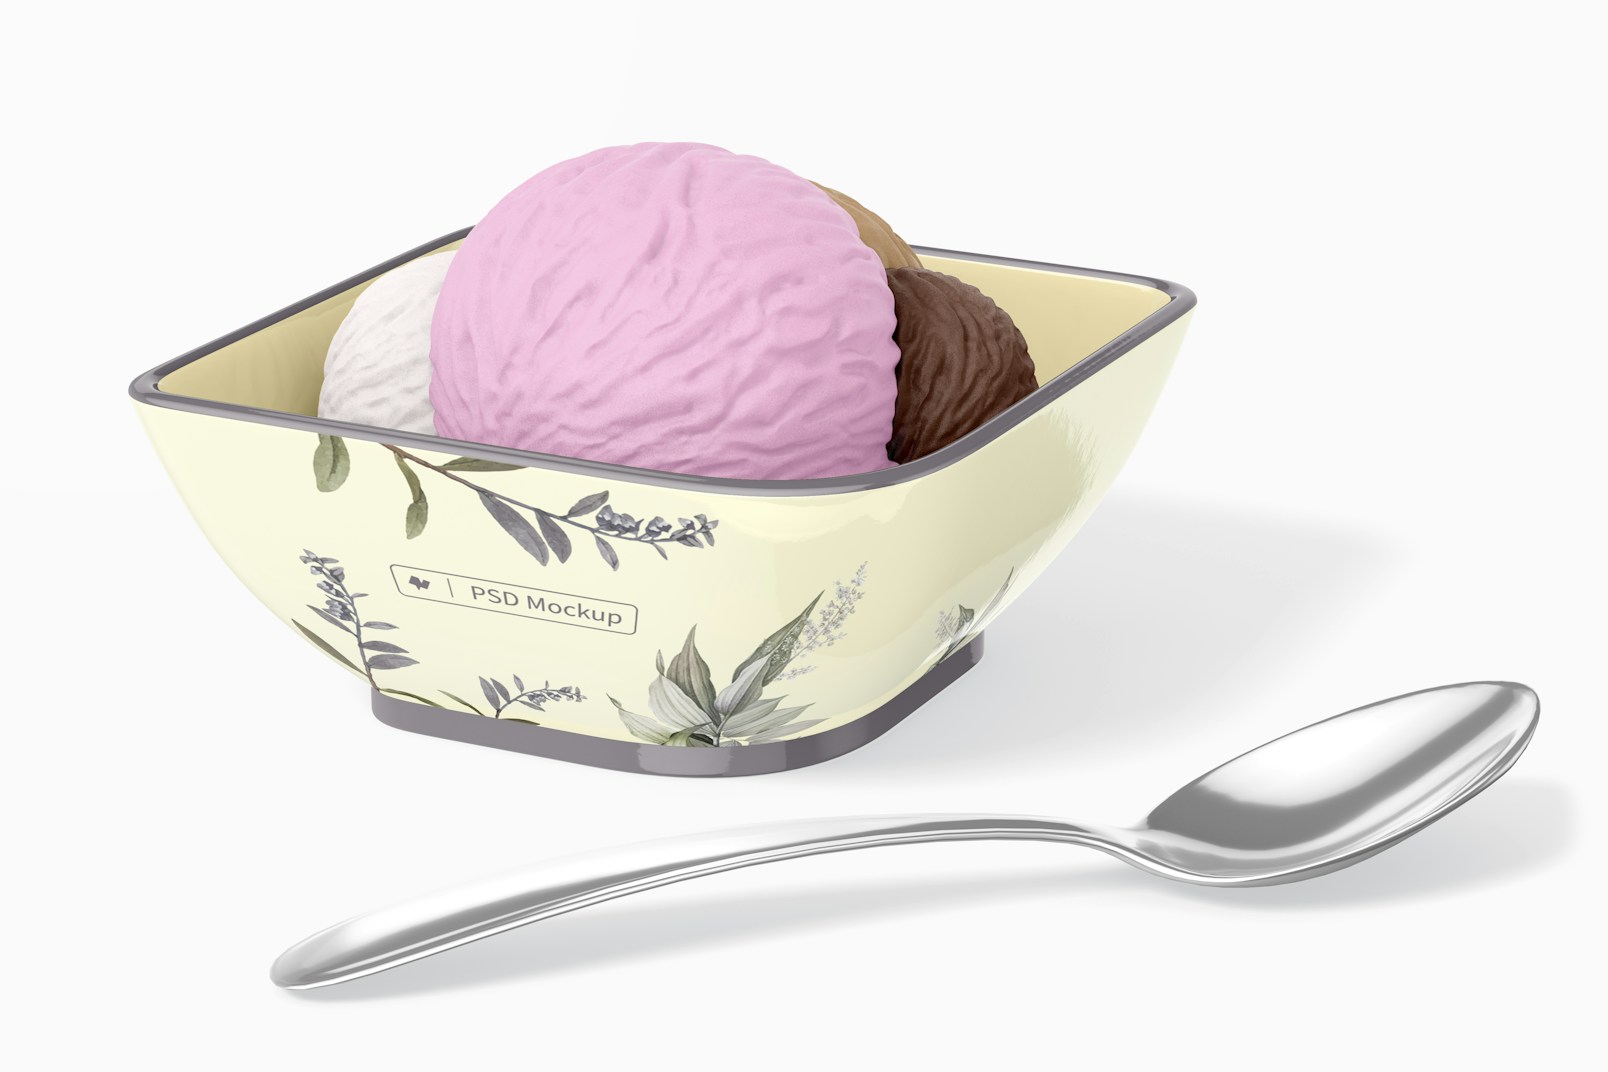 Square Dessert Bowl Mockup, with Spoon